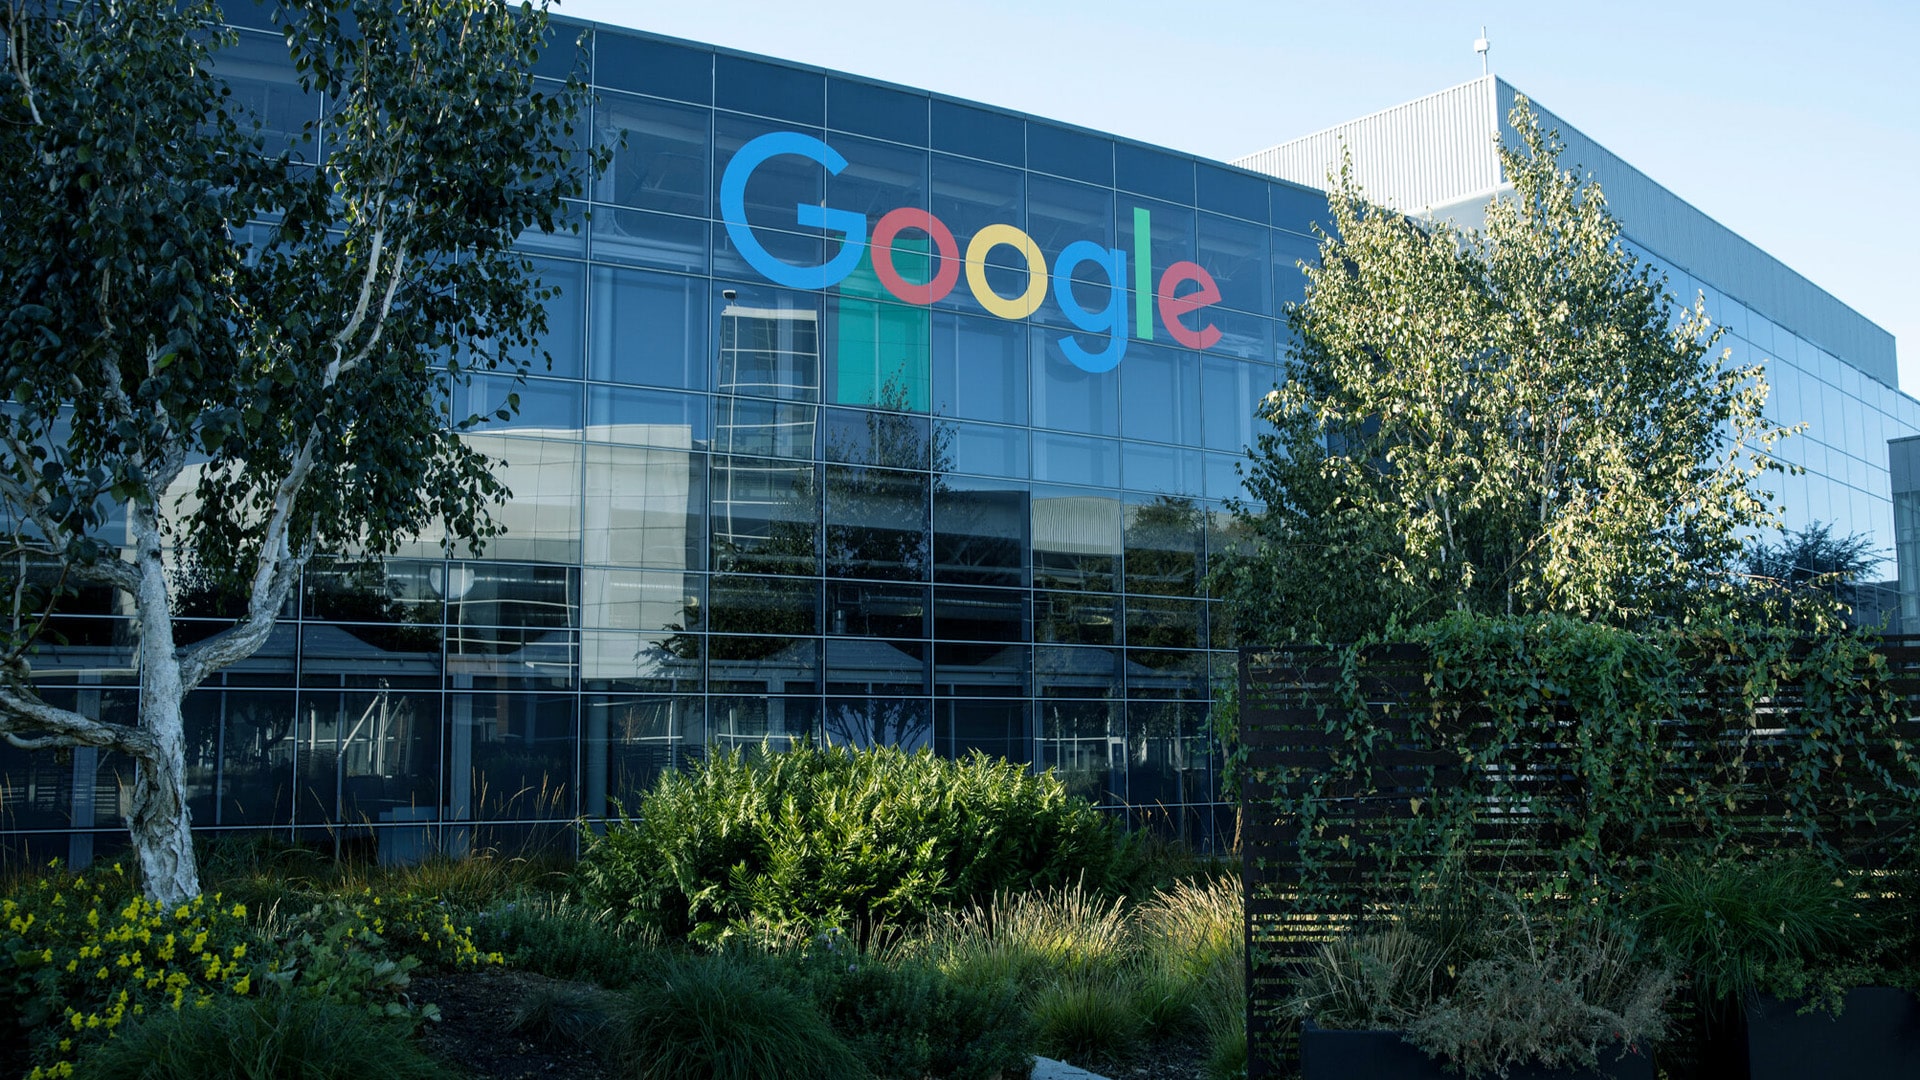 Google seeks exemption from Centre's new IT rules